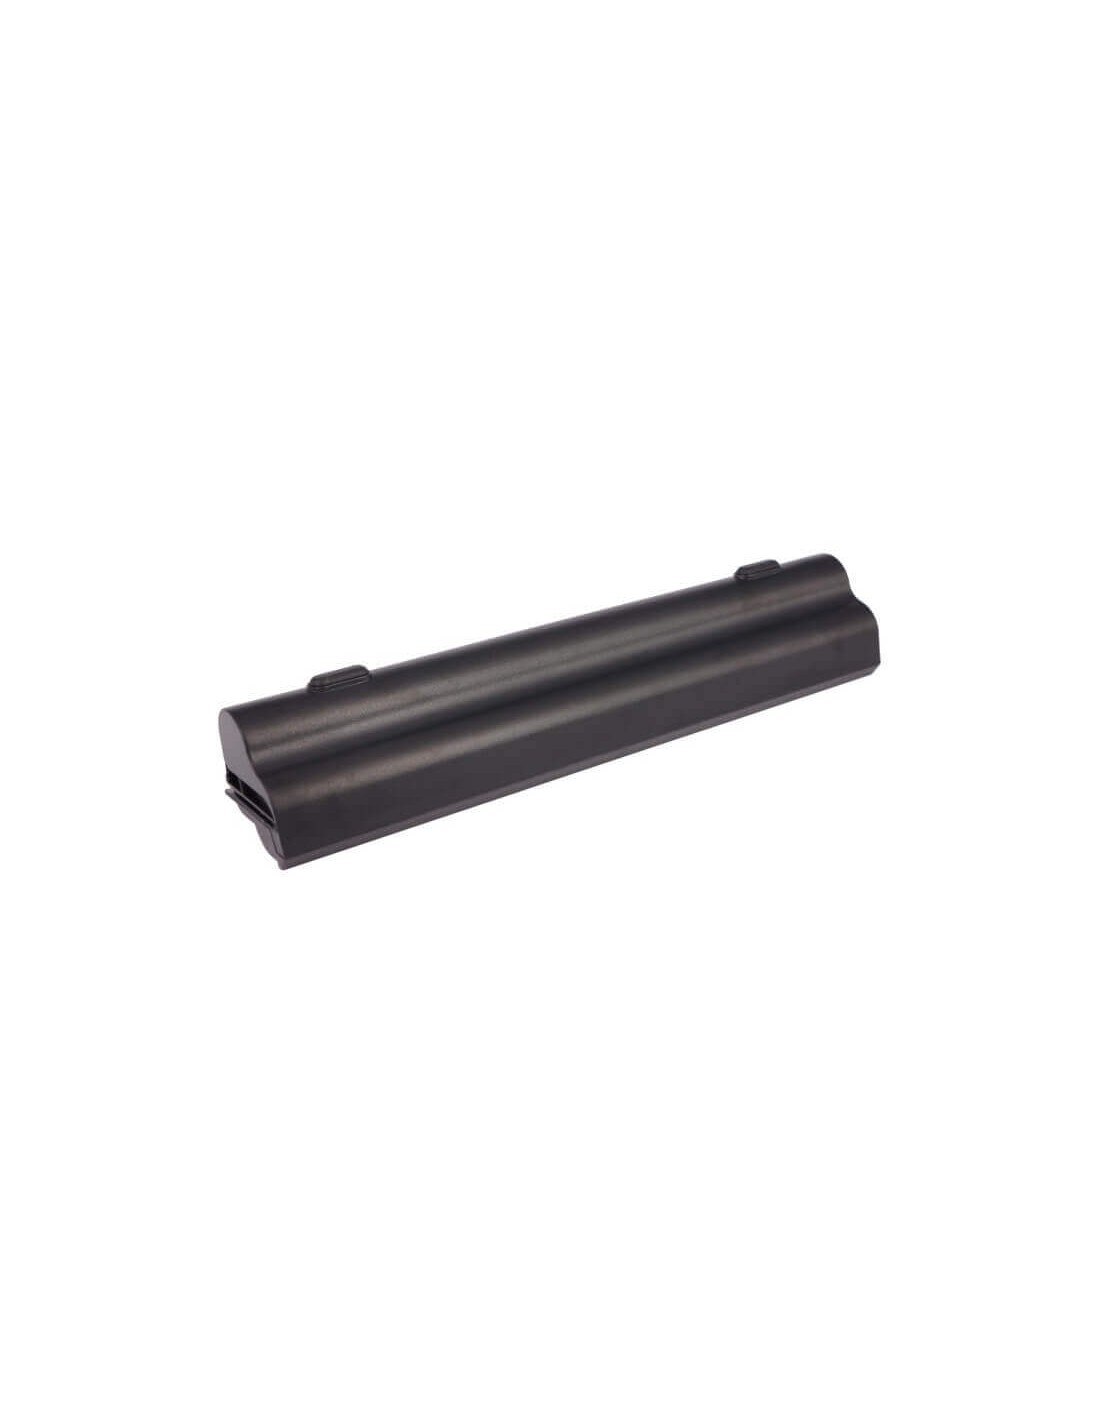 Black Battery for Acer Aspire One D255, Aspire One D260, One D260-2028 11.1V, 4400mAh - 48.84Wh